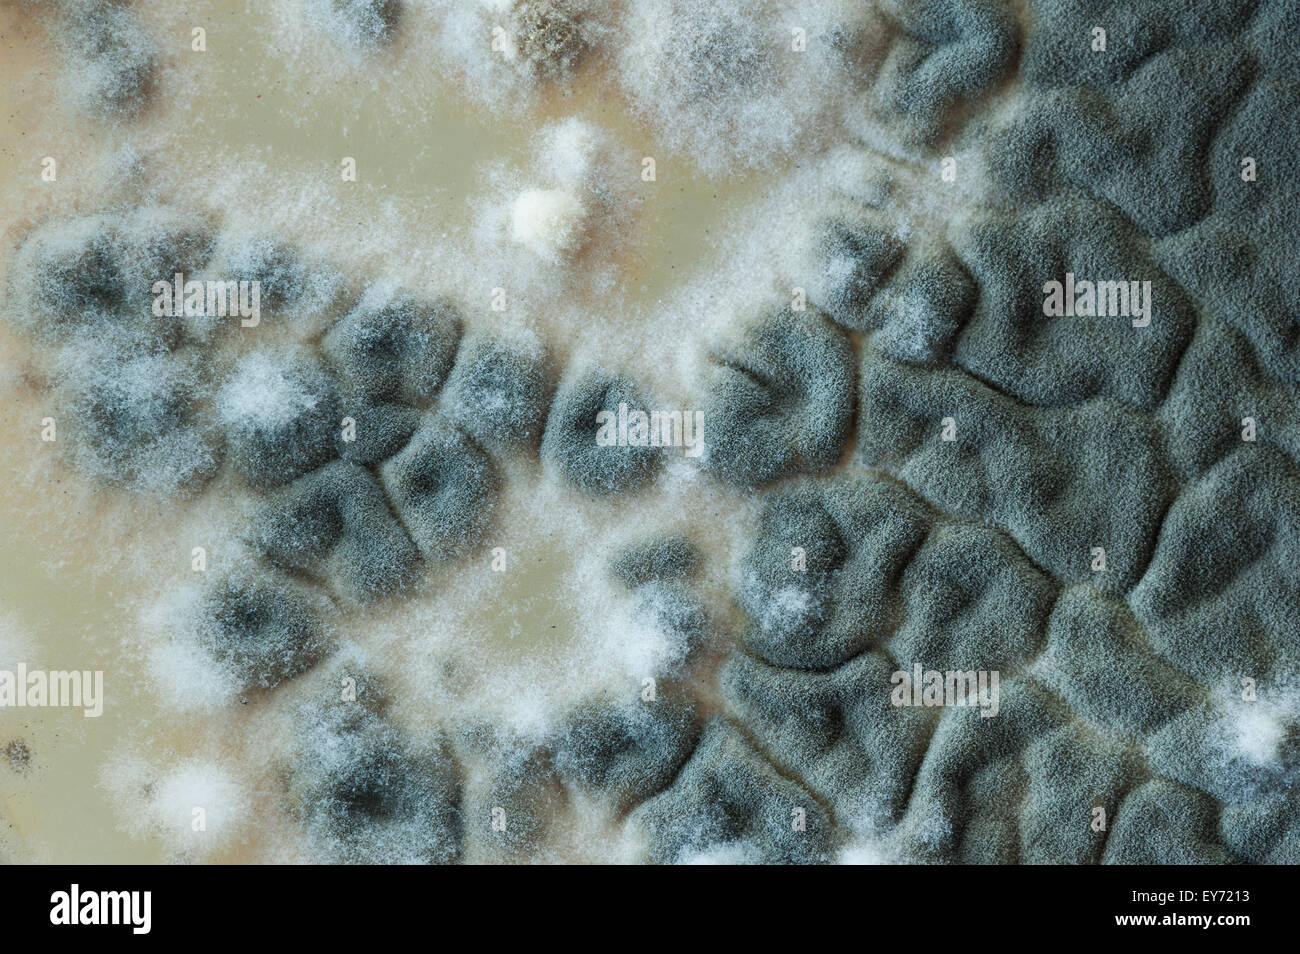 Interesting patterns at boundaries between pin mould fungi and the deep green  turquoise blue color of spores in penicillium Stock Photo